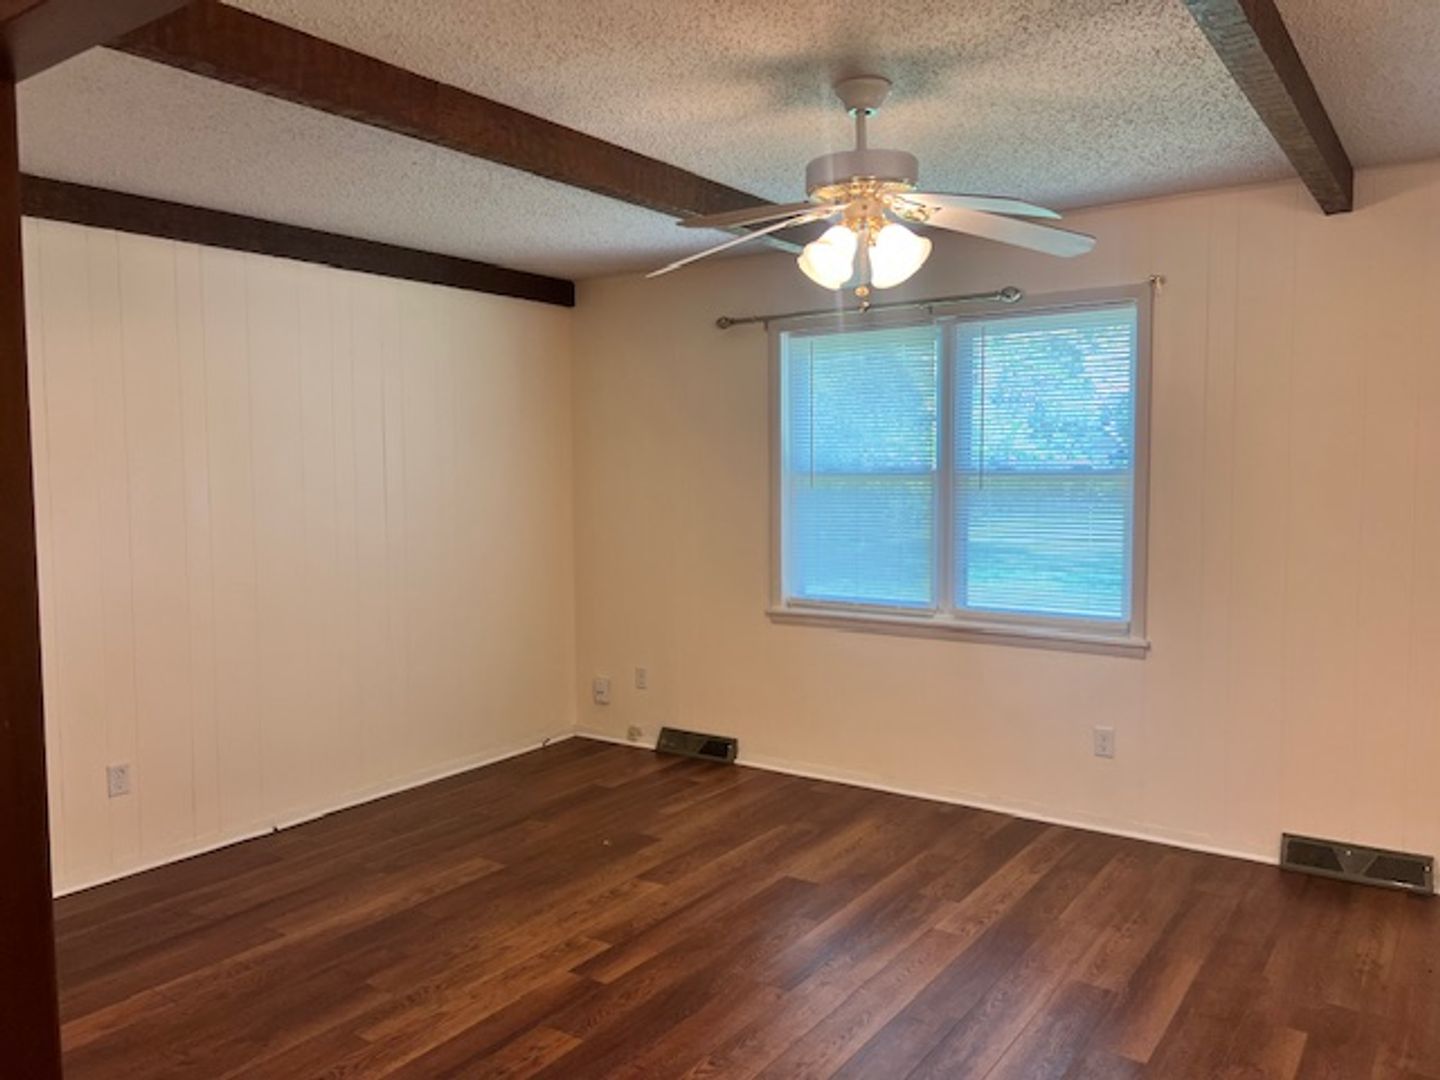 Updated 3 bedroom home near Bass Pro